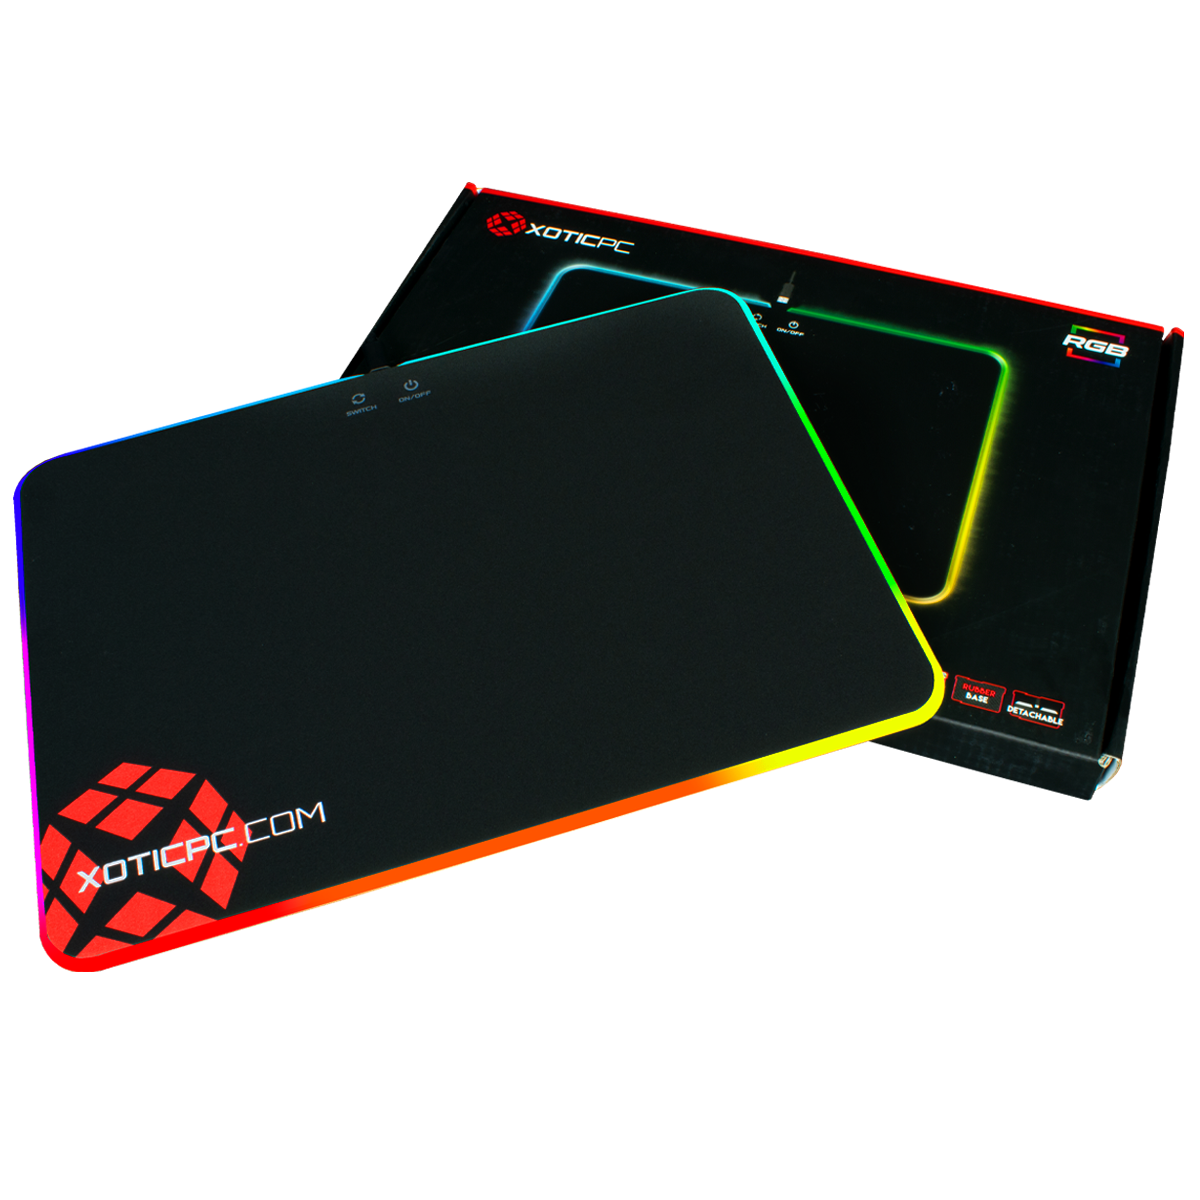 XOTIC PC RGB Mousepad - Labor Day Special